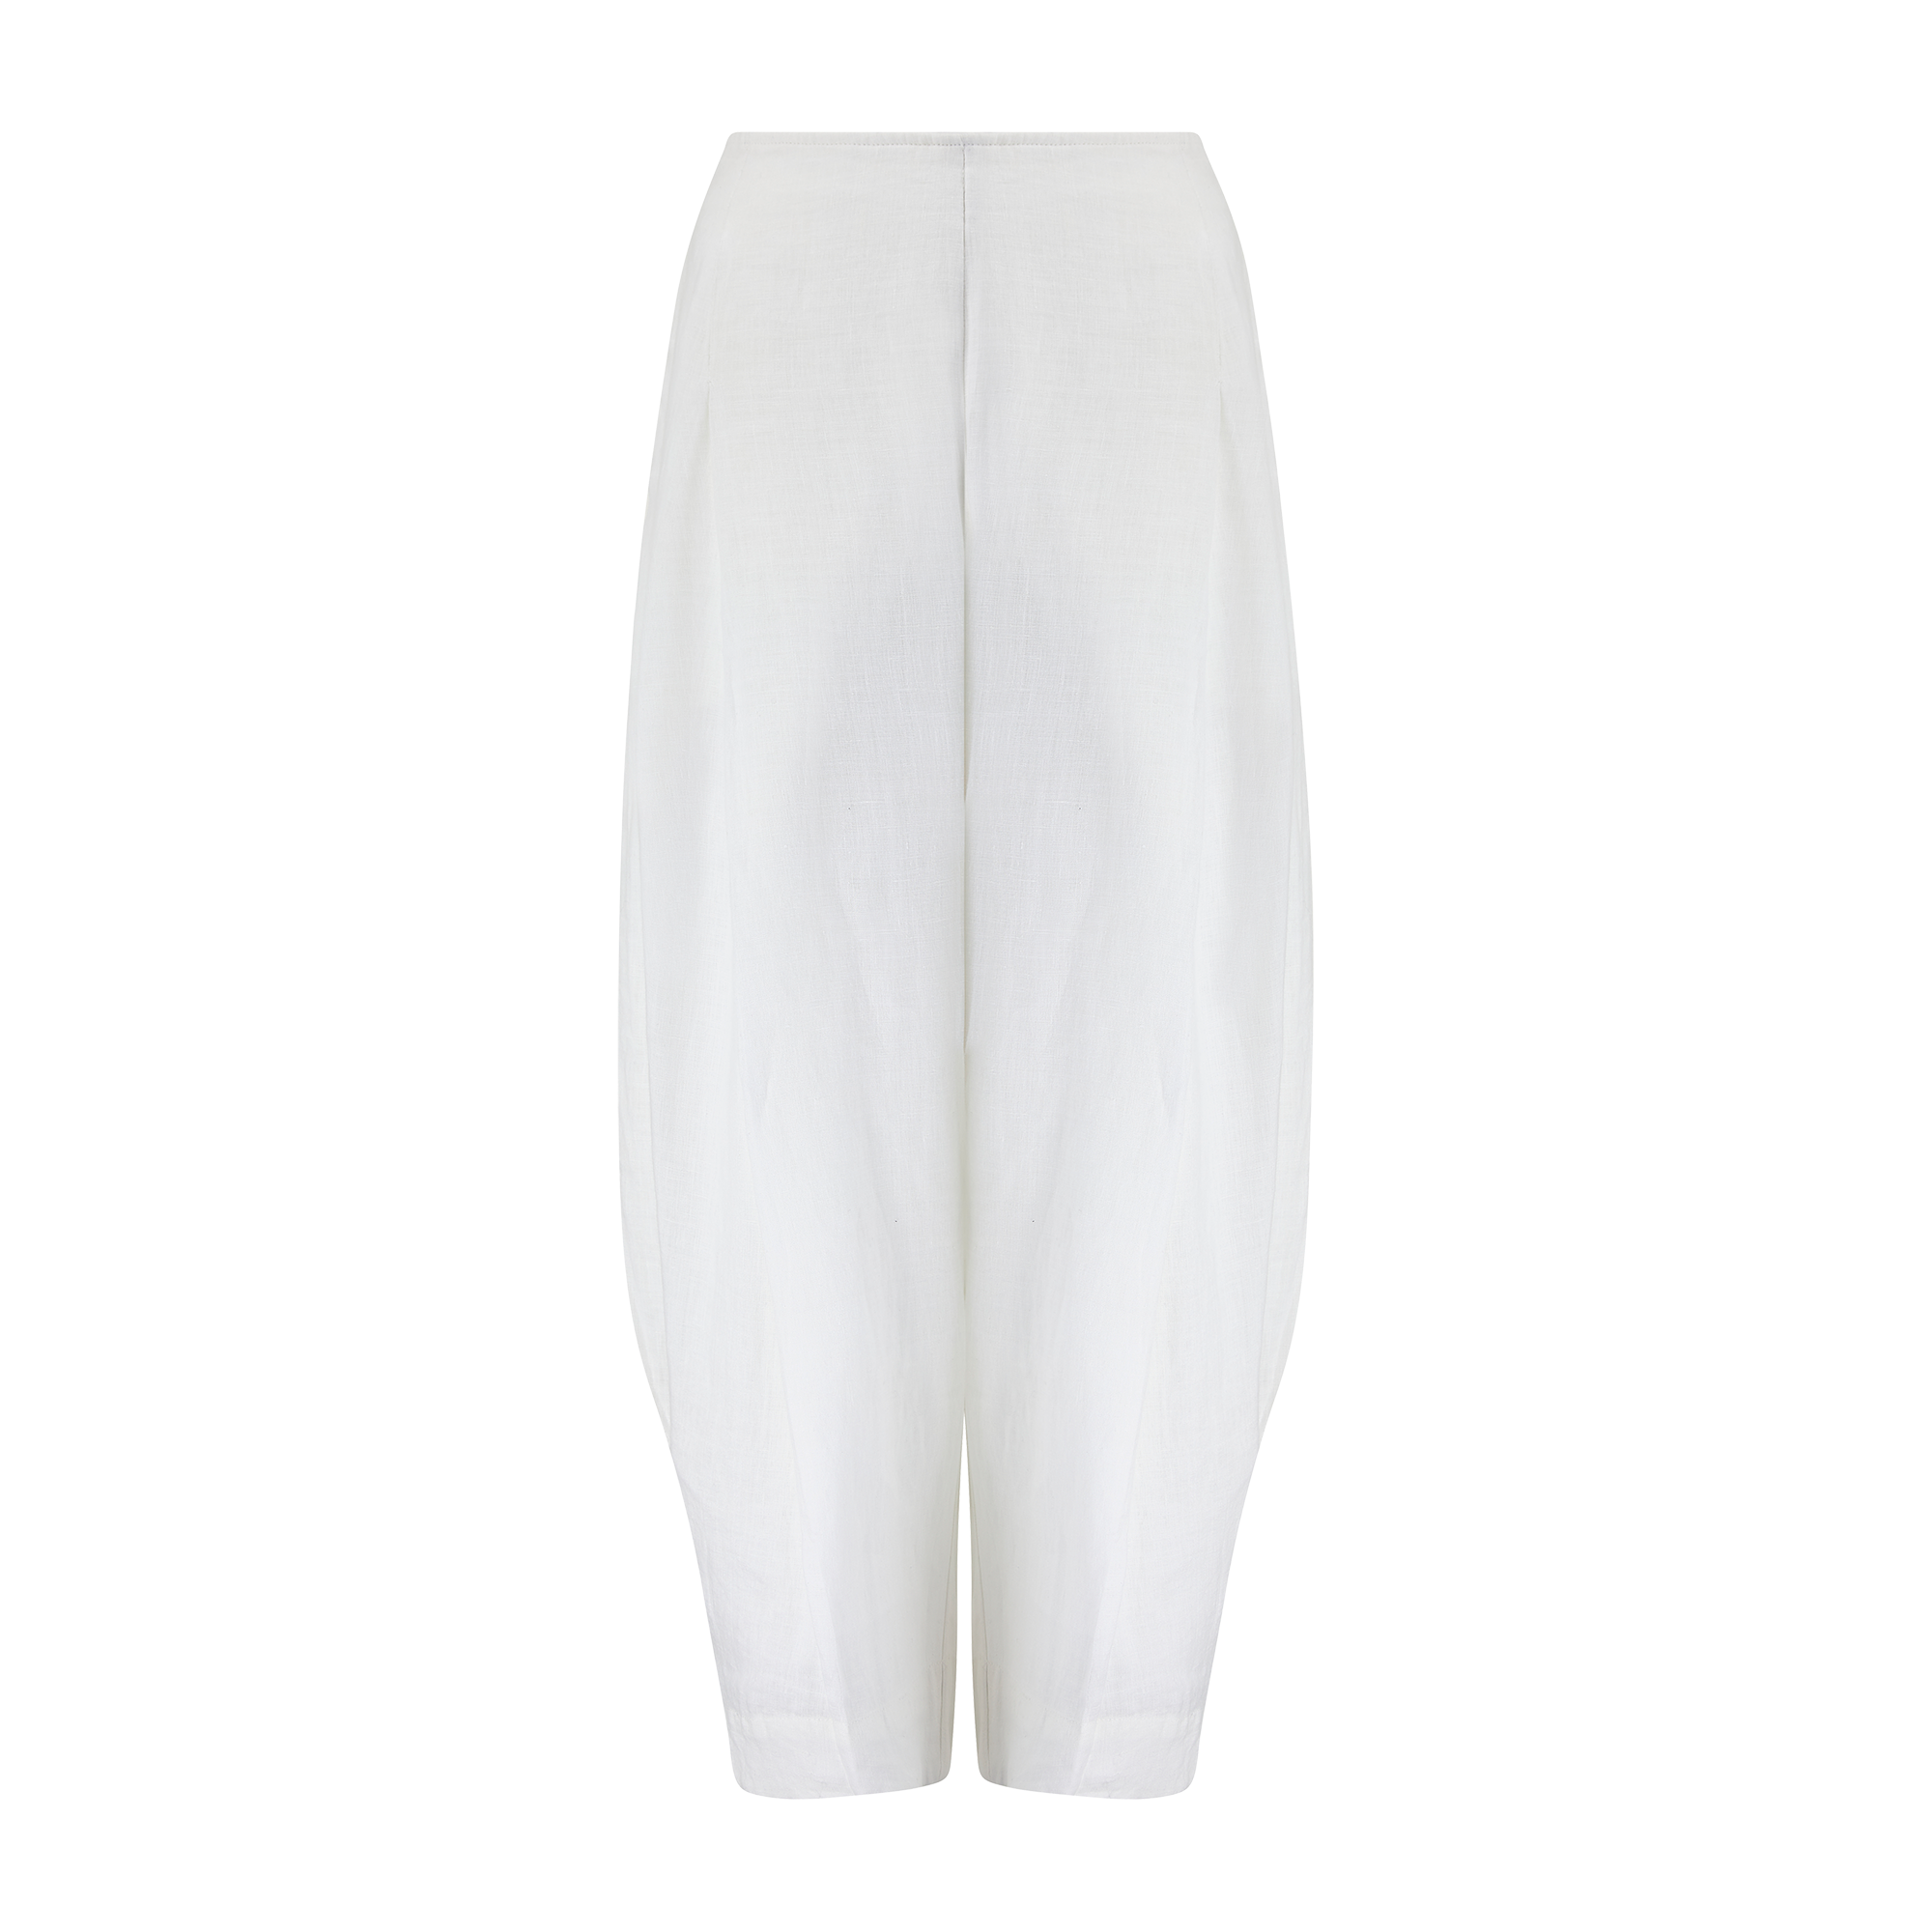 The Hector Trousers